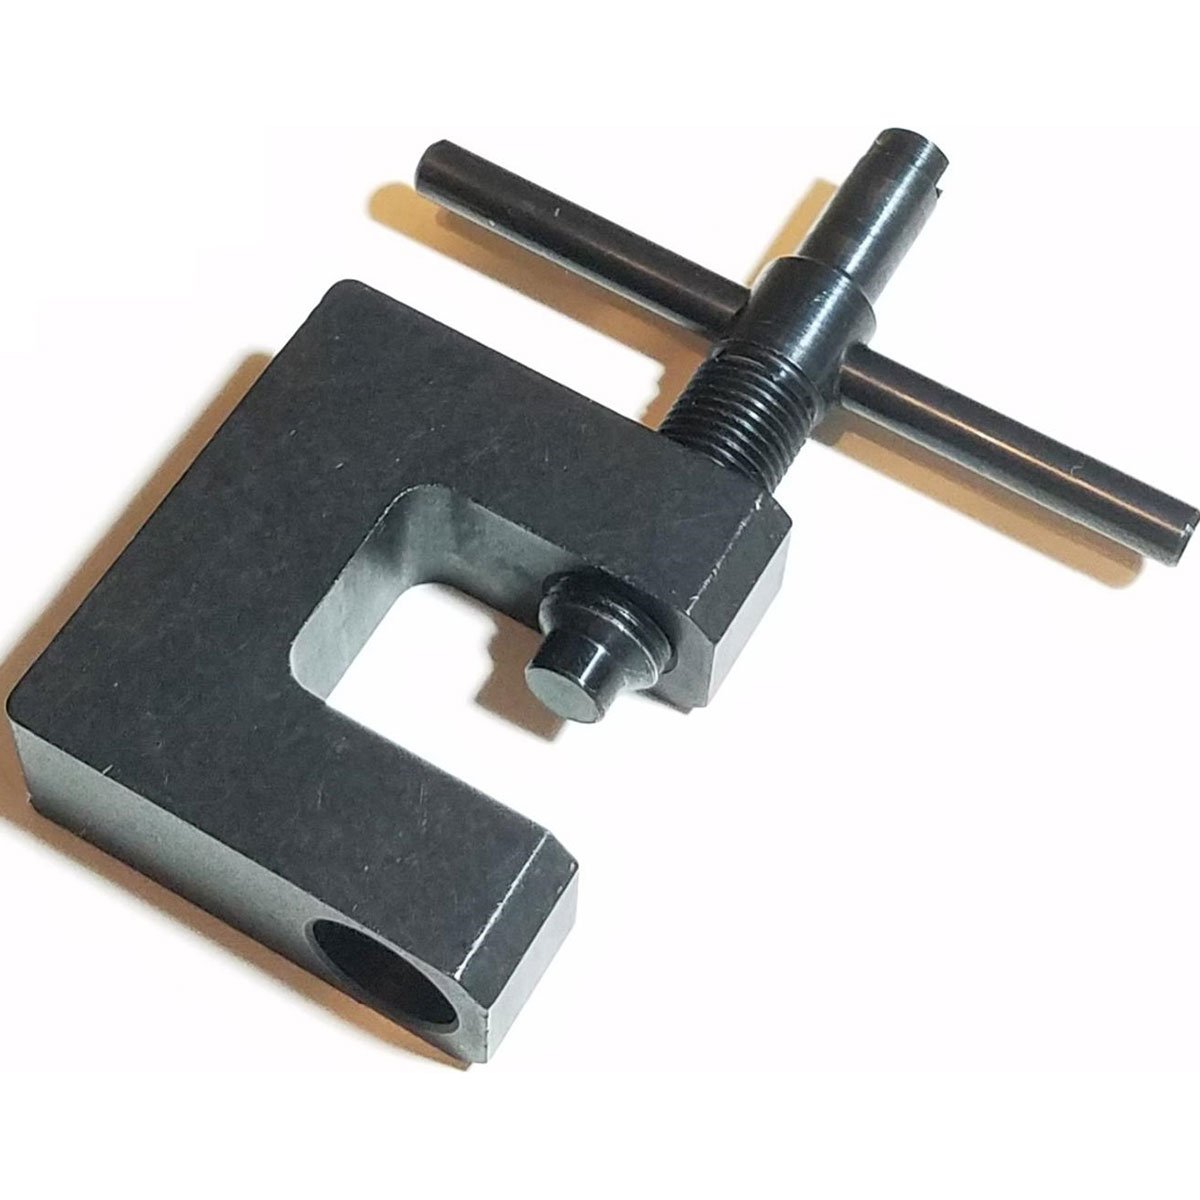 XTECH TACTICAL - FRONT SIGHT TOOL FOR AK47/74